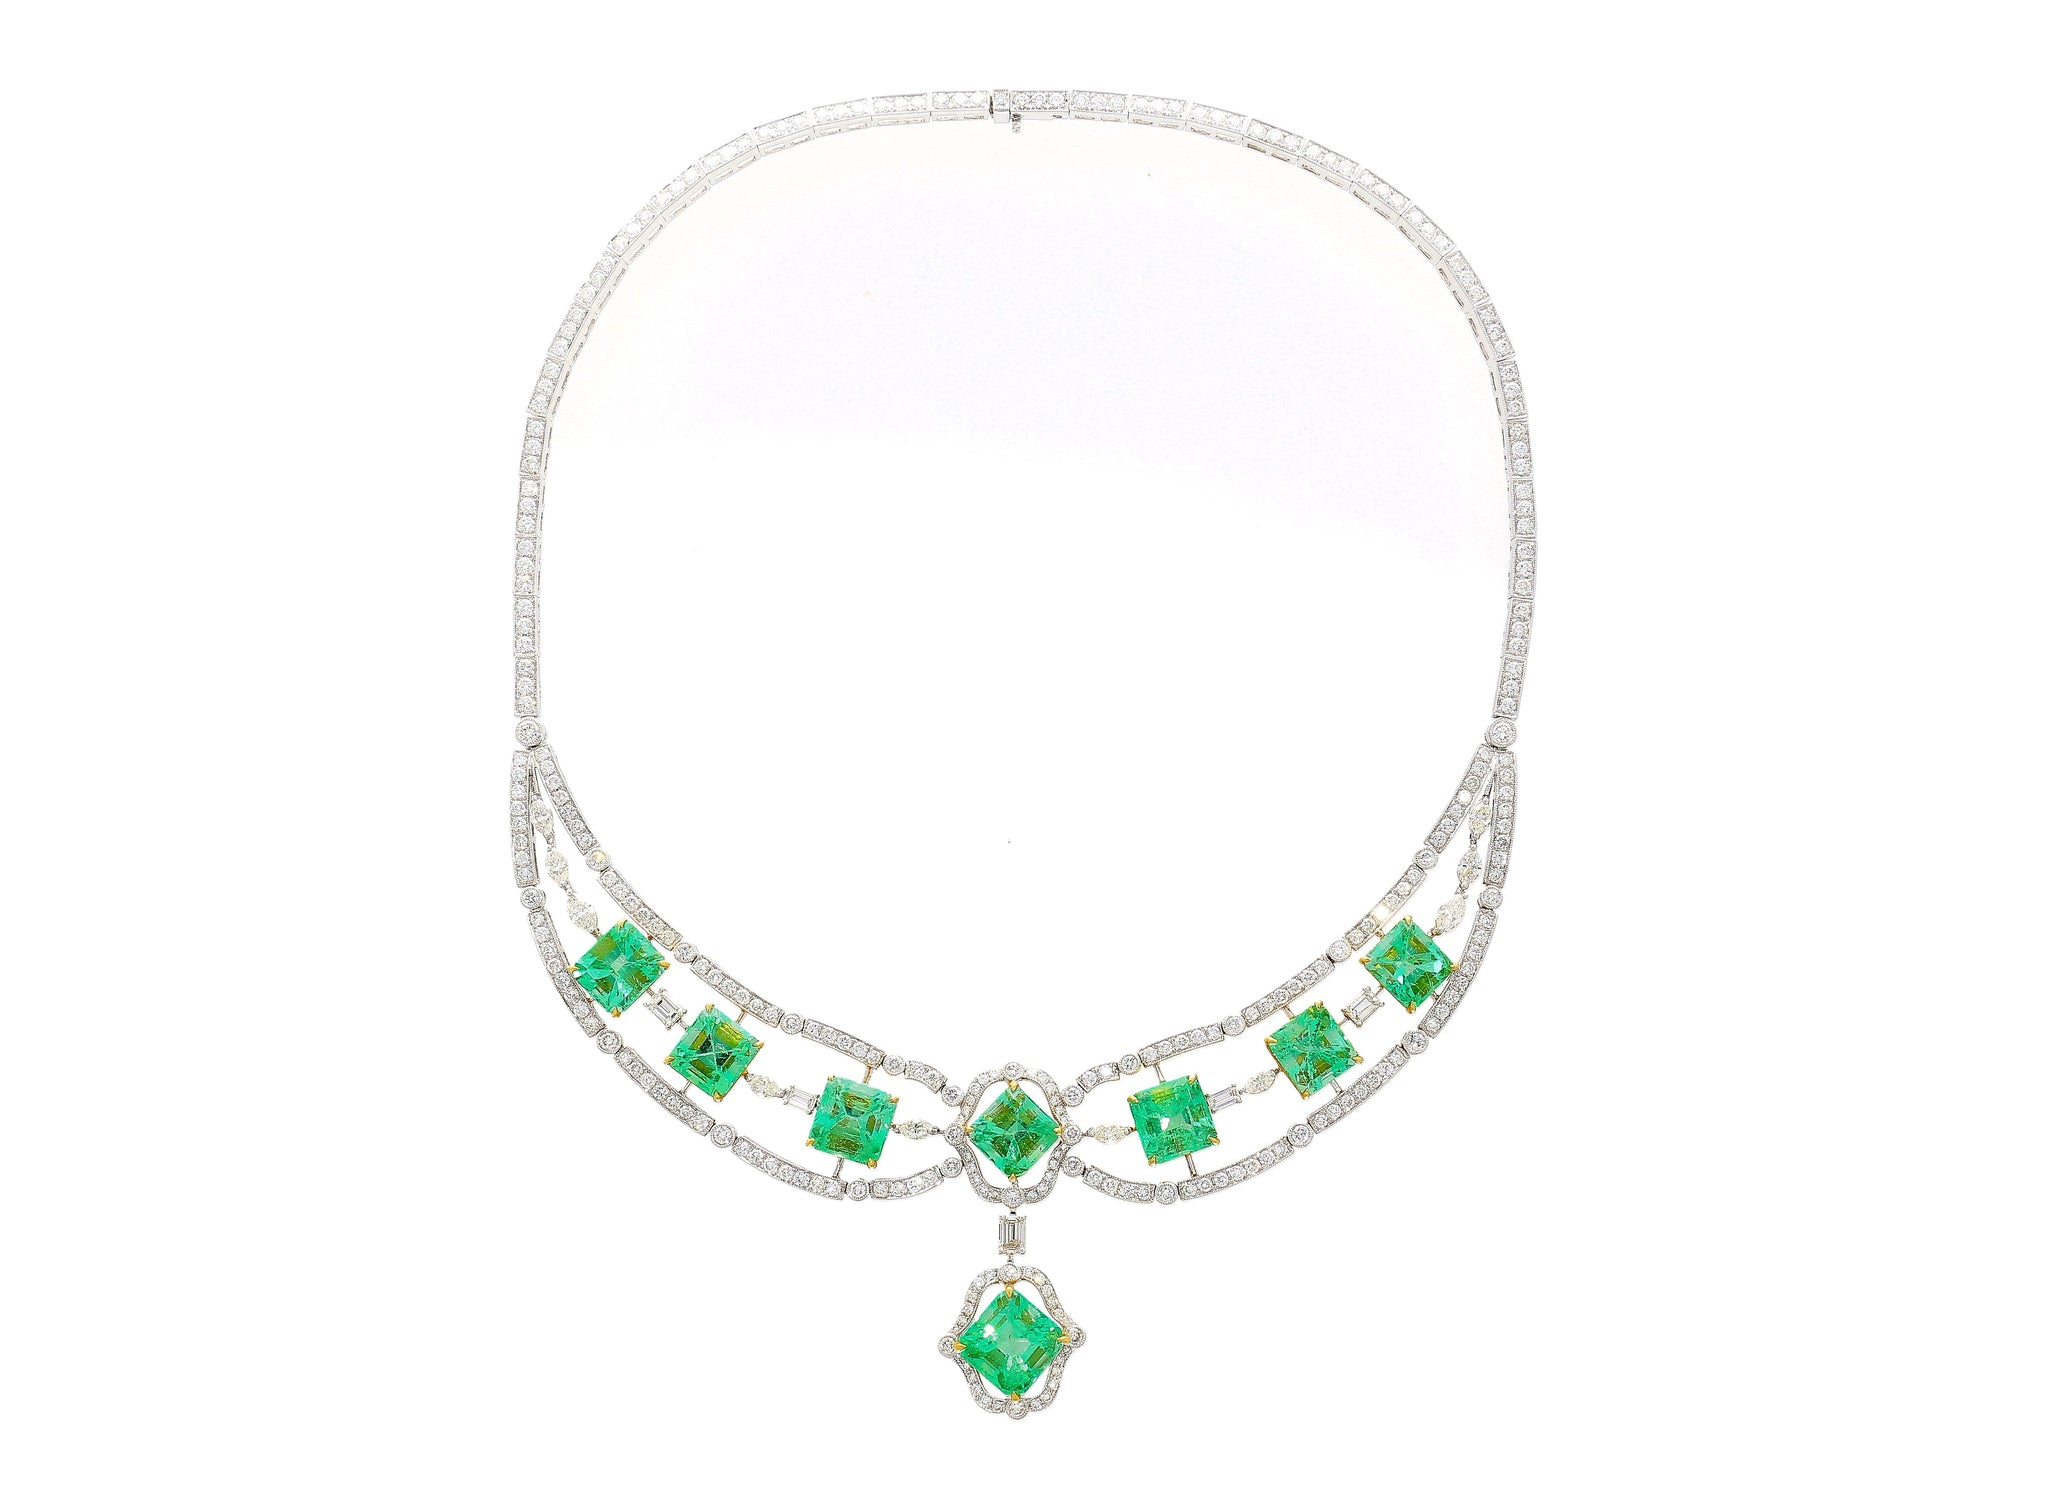 GIA Certified 6.21 Carat Emerald and 30.38 Carat Emerald With 9.86 Carat Diamonds Chandelier Necklace-Necklace-ASSAY